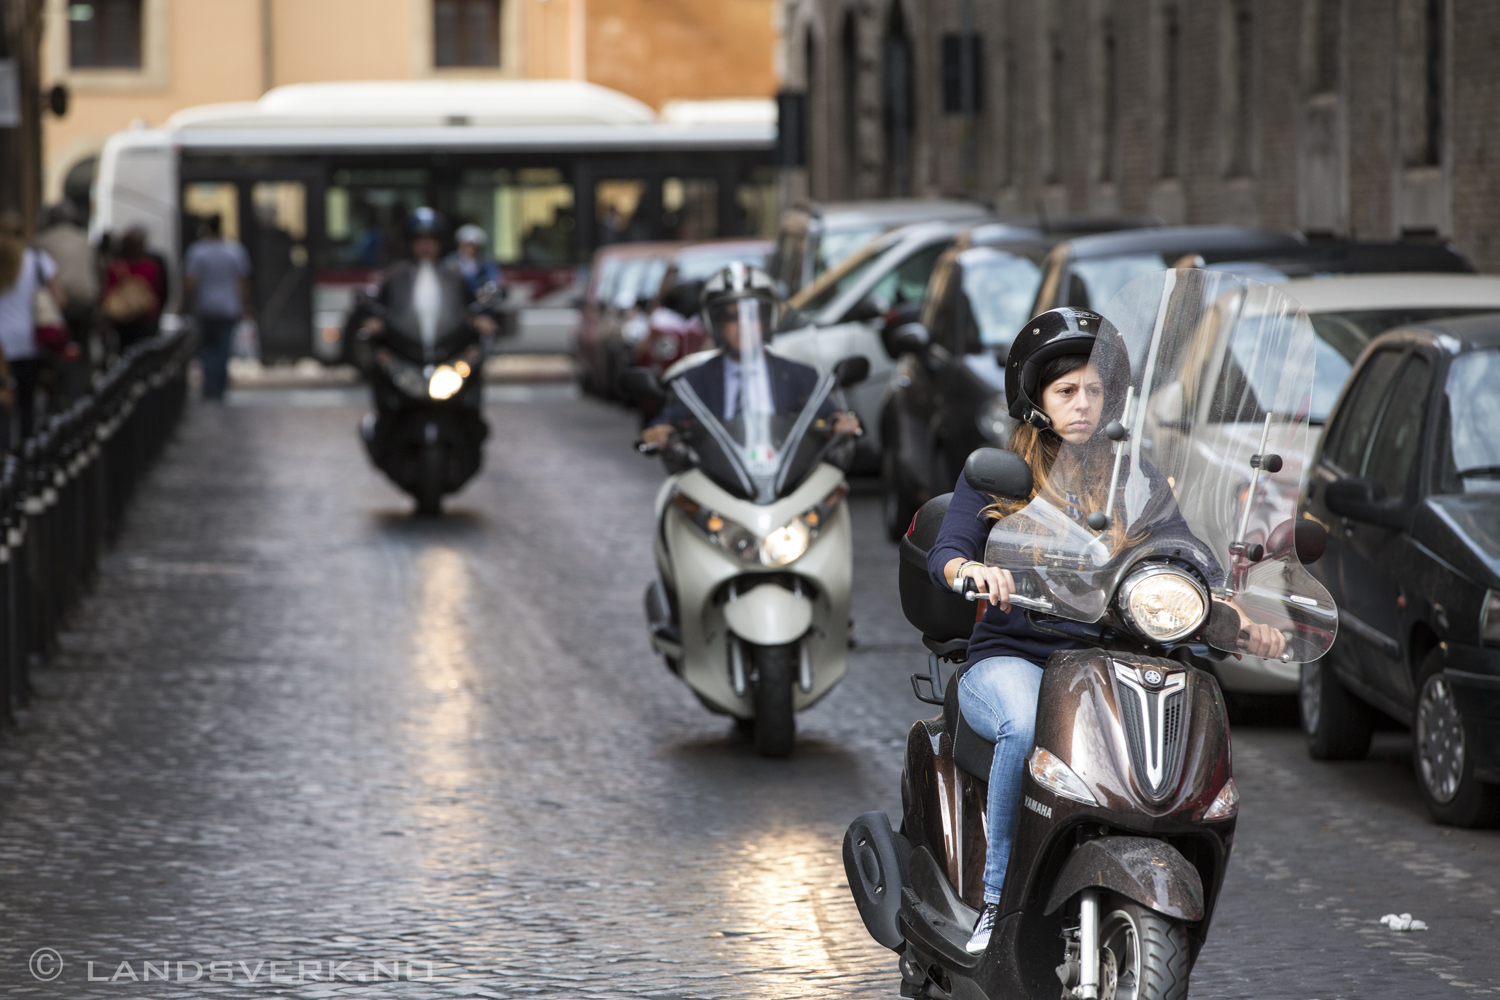 Rome, Italy. 

(Canon EOS 5D Mark III / Canon EF 70-200mm f/2.8 L IS II USM)